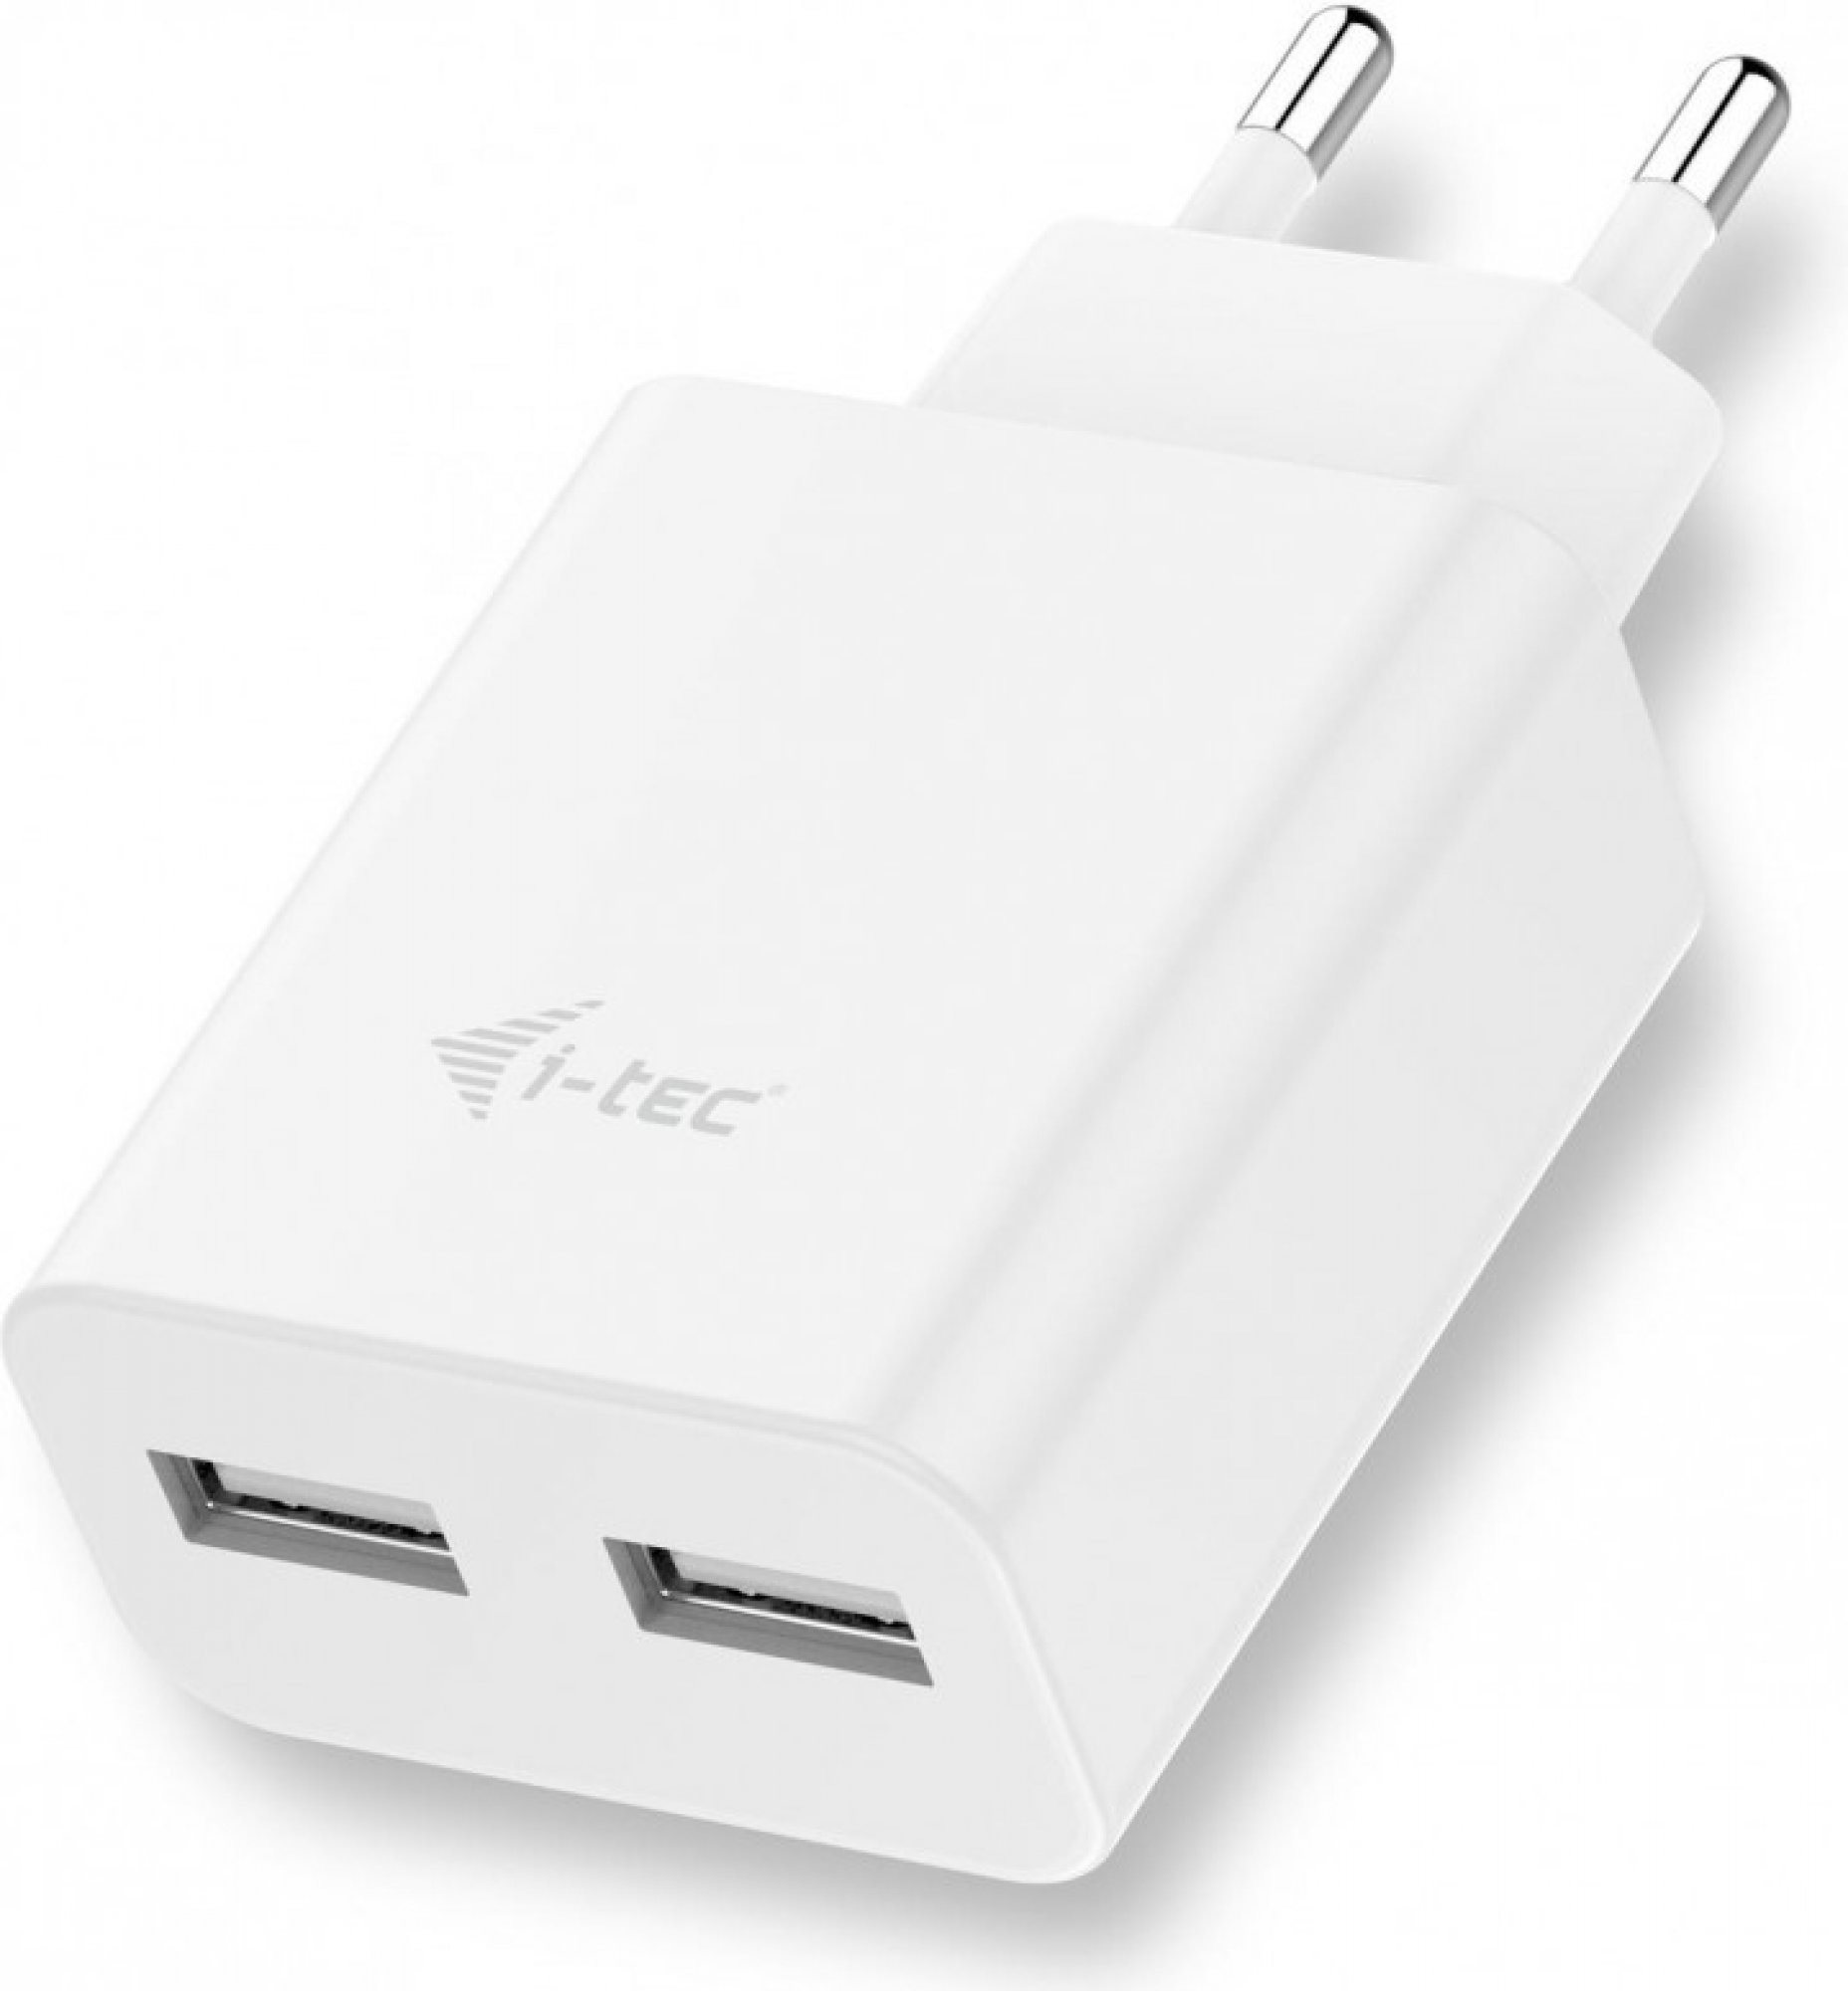 i-tec USB Power Charger 2 Port 2.4A White